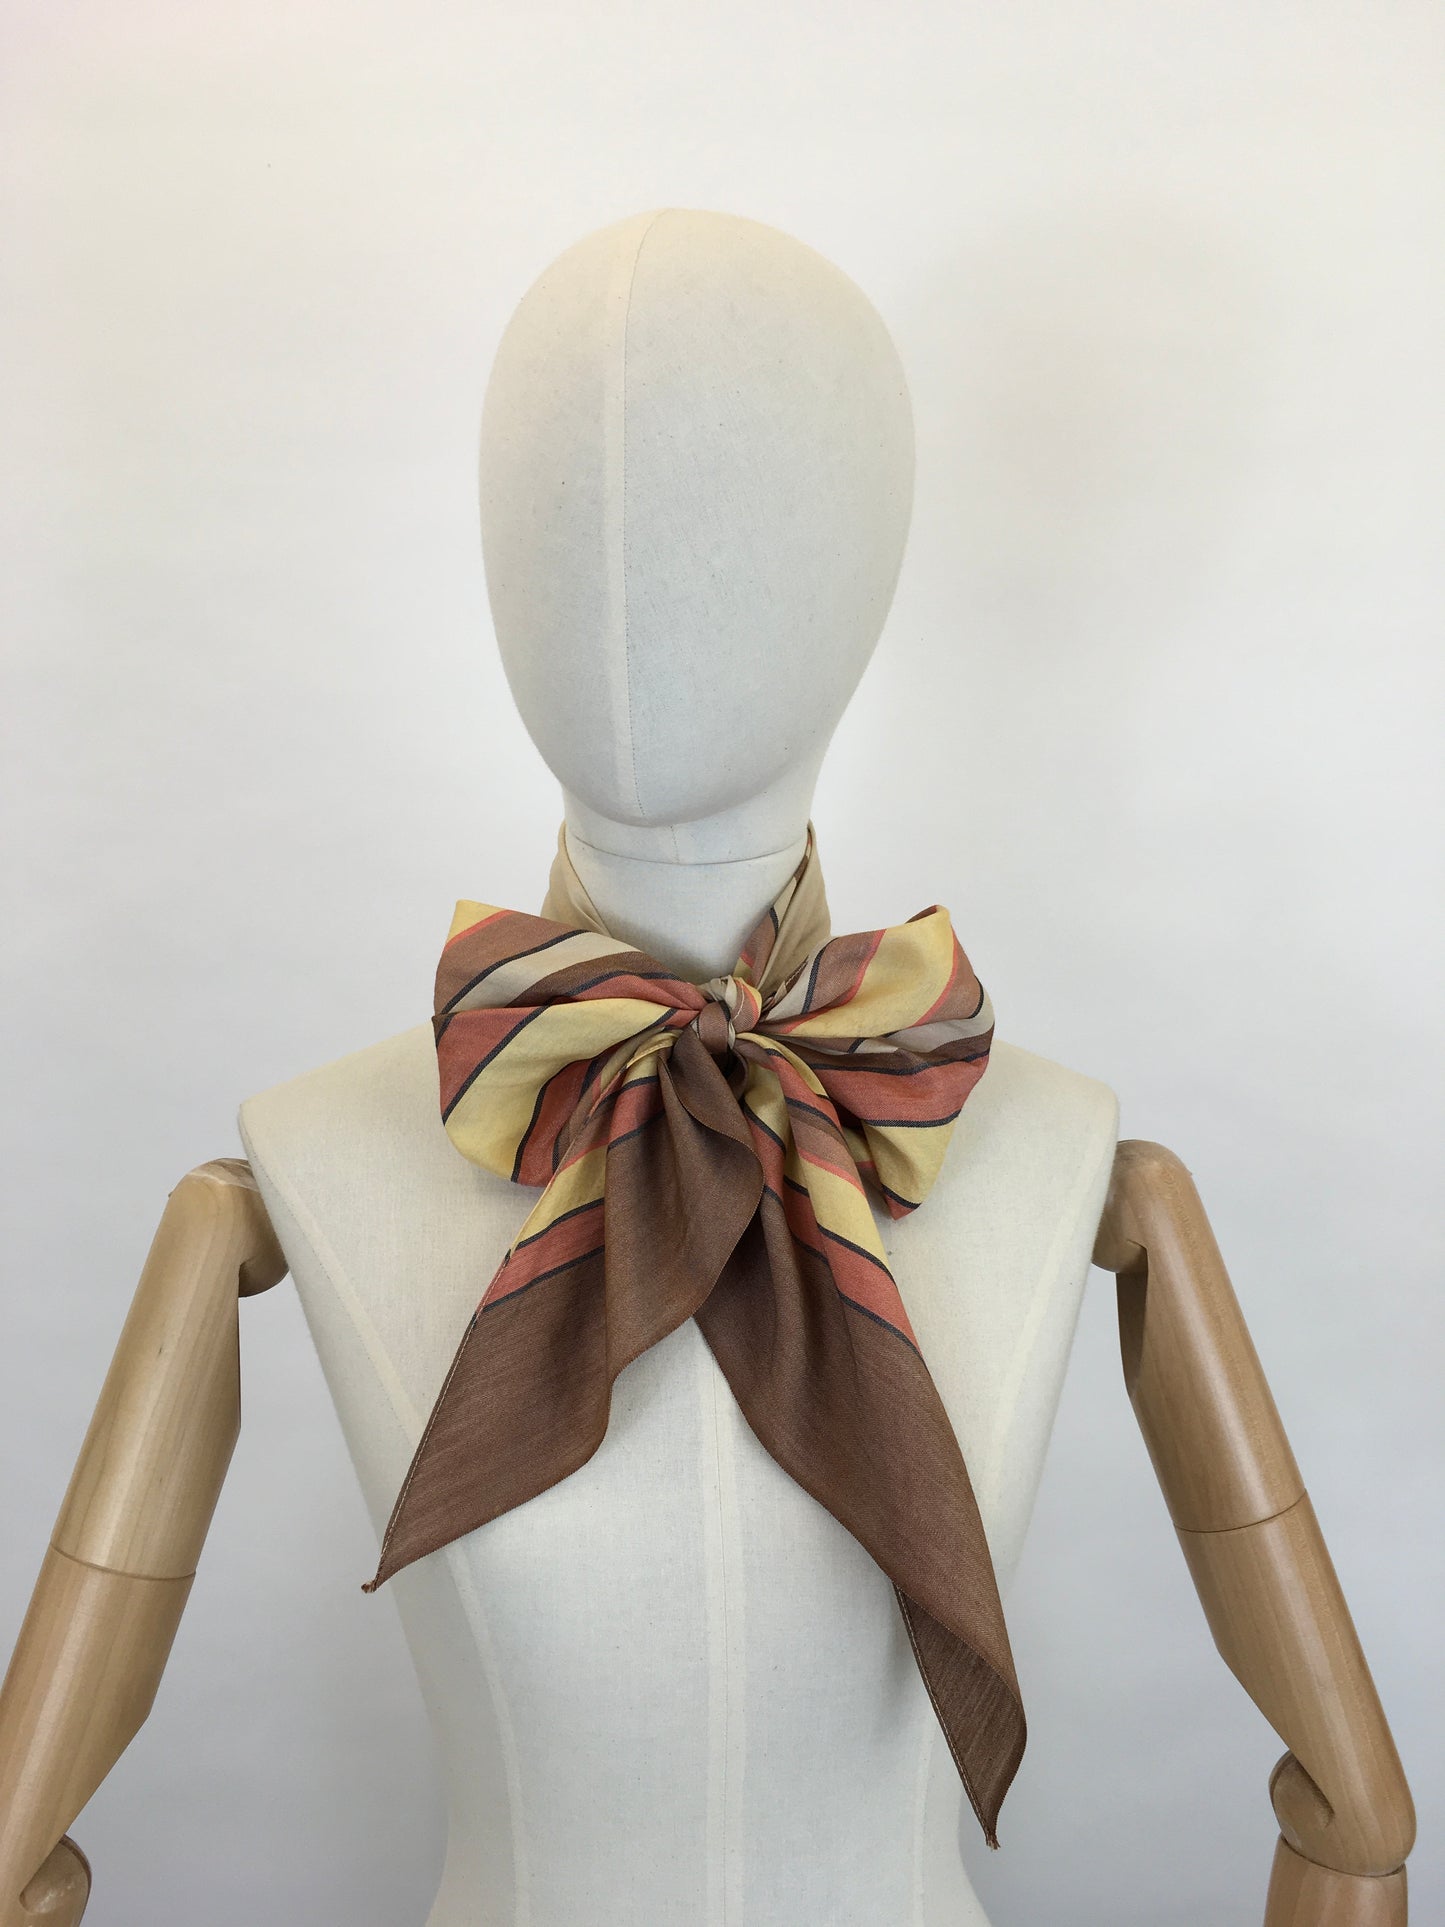 Original 1930’s Deco Pointed Scarf - In Beautiful Warm Browns, Yellows, Burnt Orange and Stencilled Black